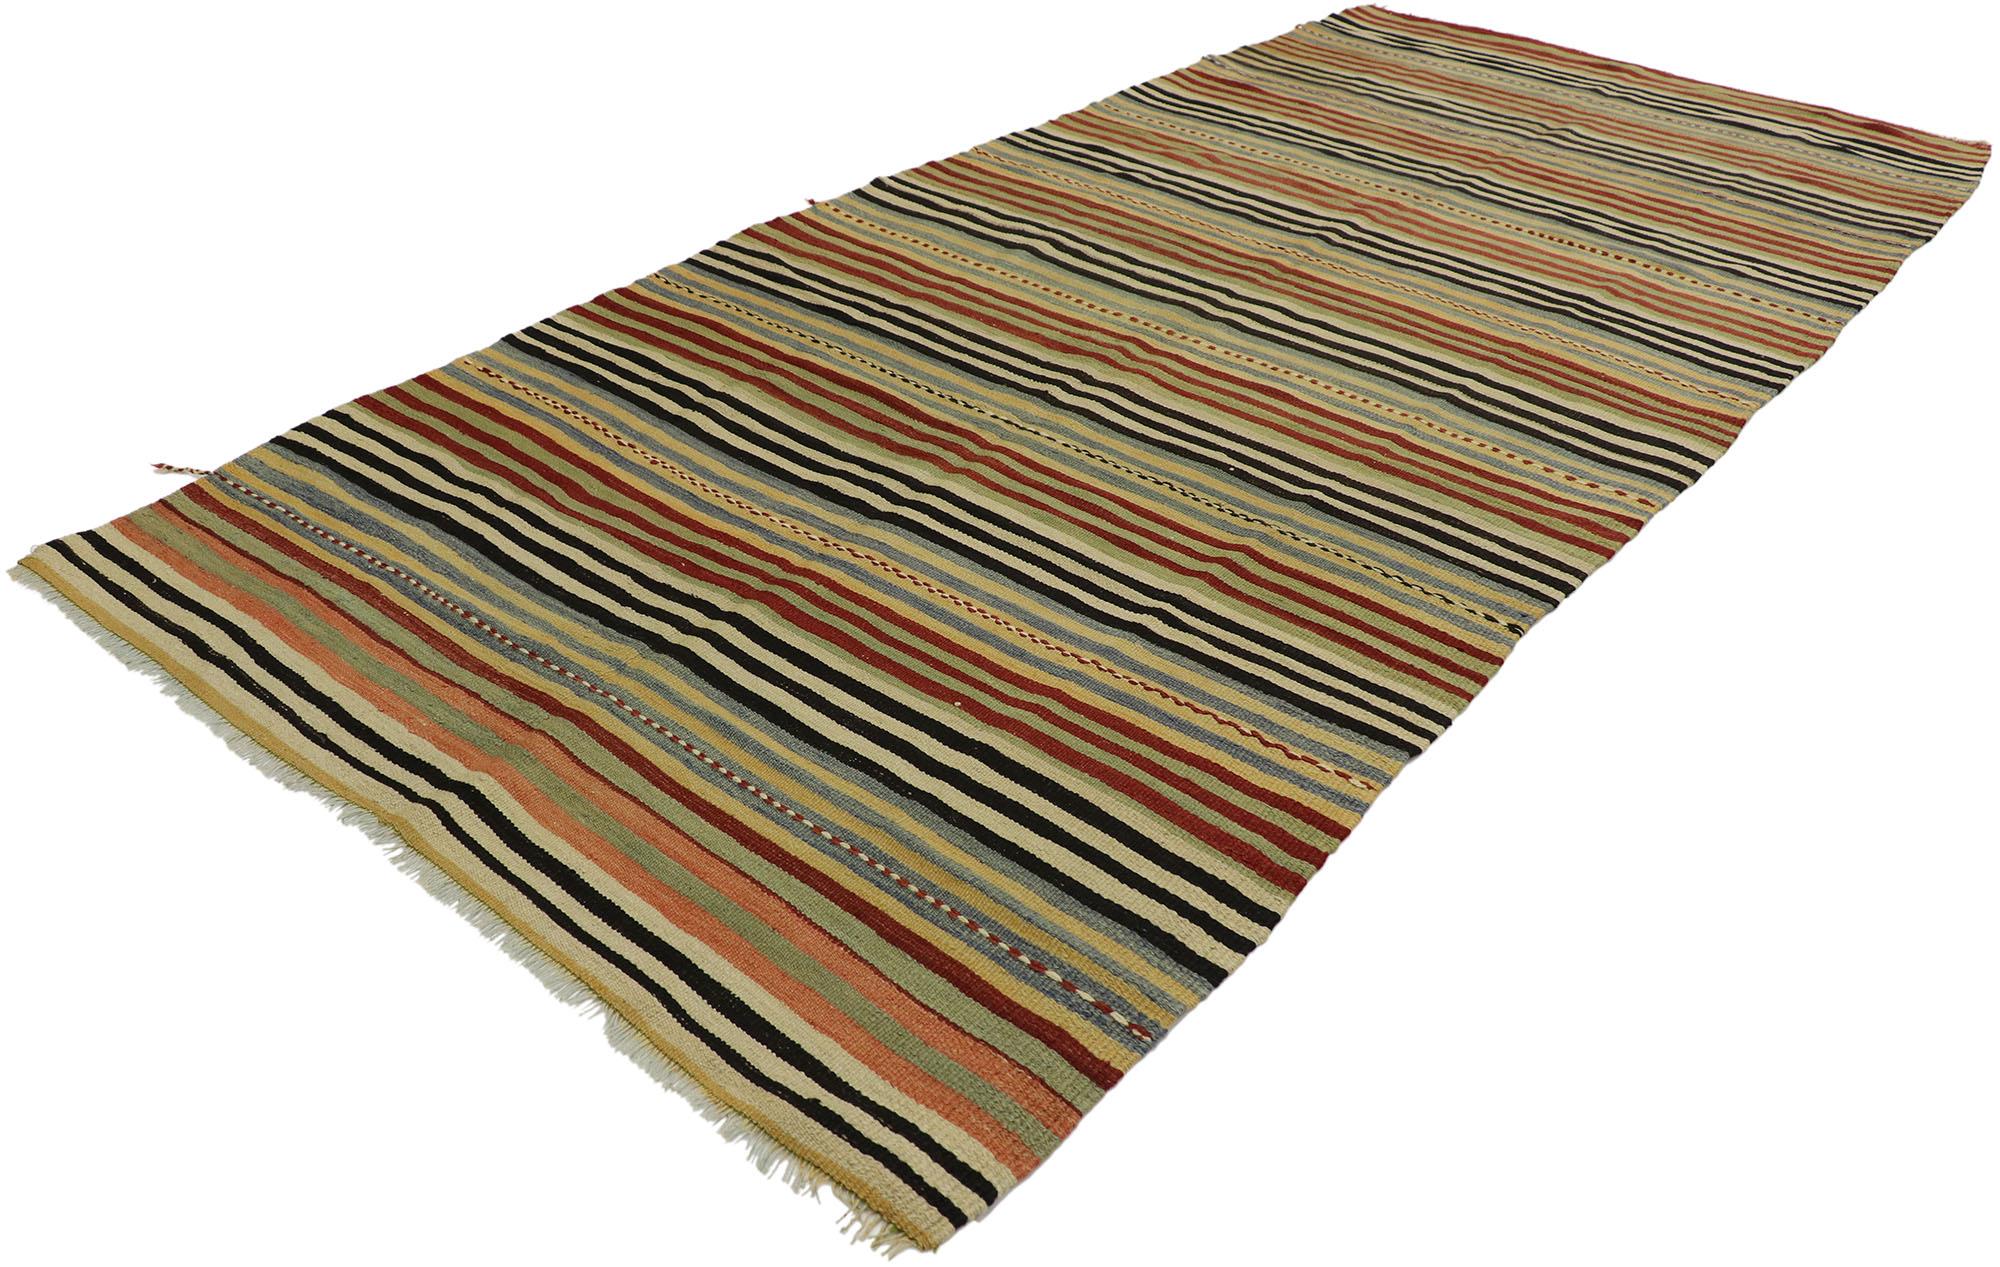 53137, vintage Turkish Kilim runner with Rustic Modern style. With its warm hues and rugged beauty, this handwoven wool striped Kilim rug manages to meld contemporary, modern, and Traditional Design elements. The flat-weave Kilim rug features a